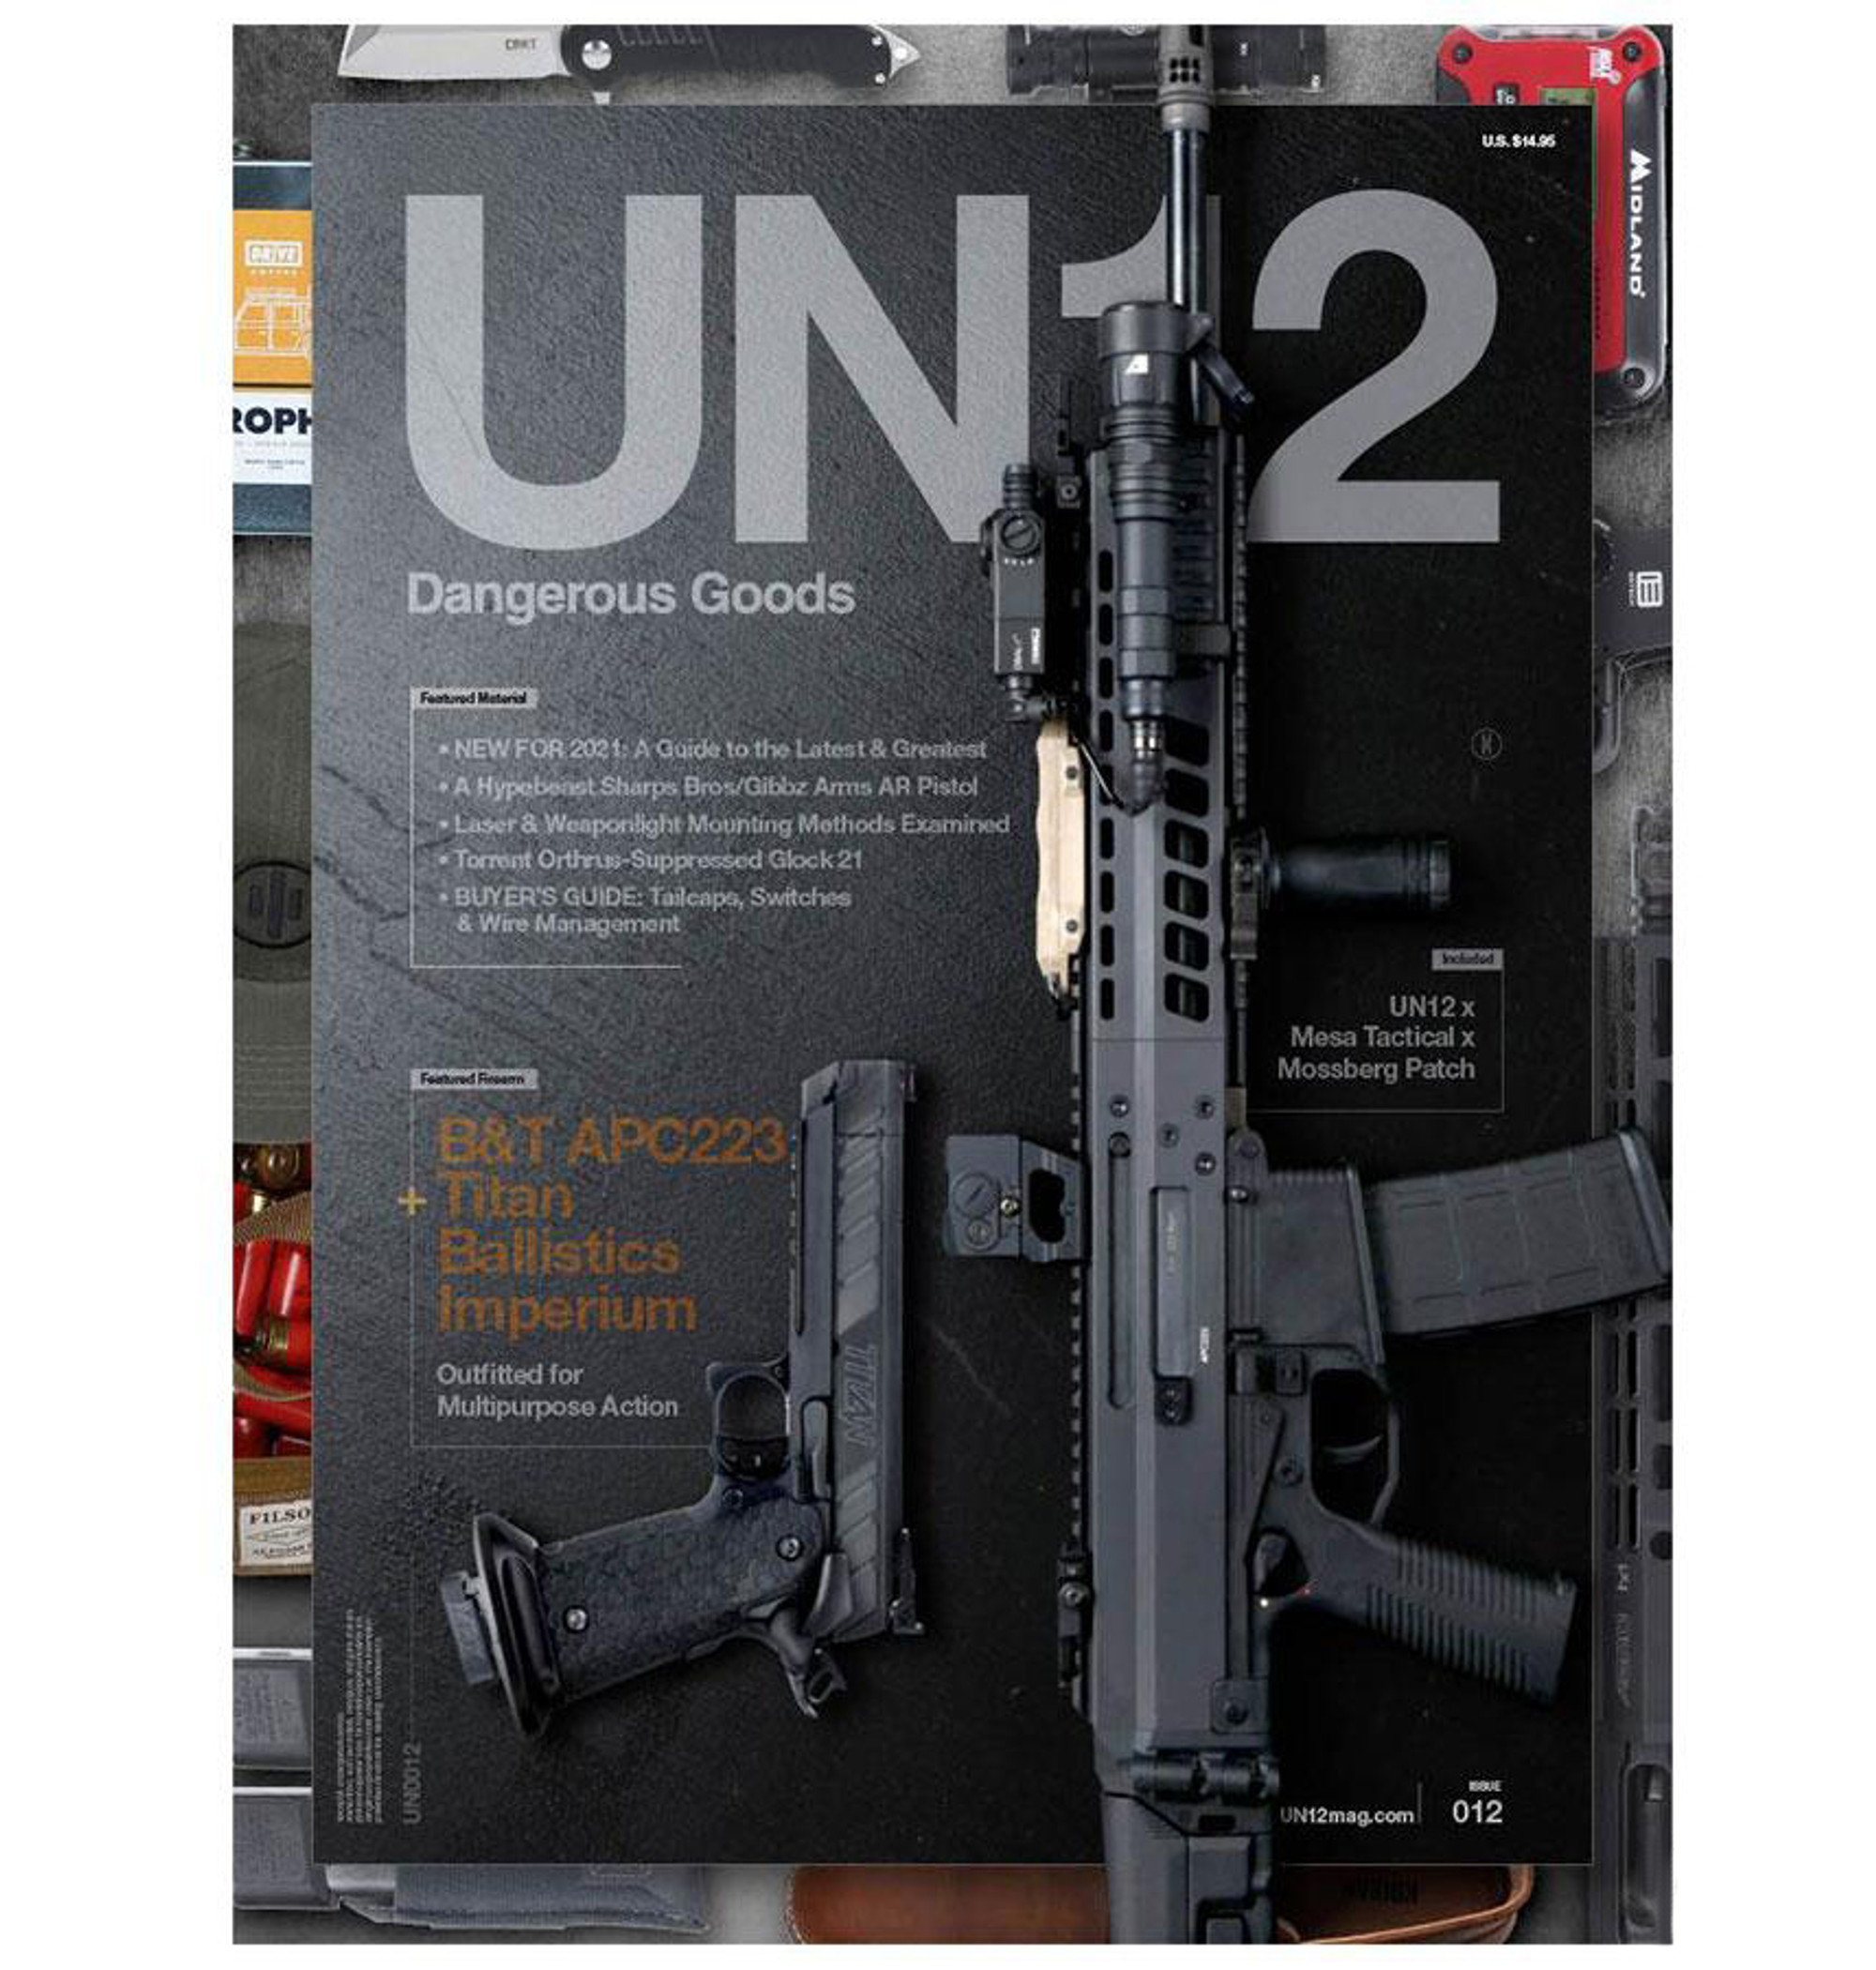 UN12 Magazine with Limited Edition UN12 x Mesa Tactical x Mossberg Patch (Issue: 012)